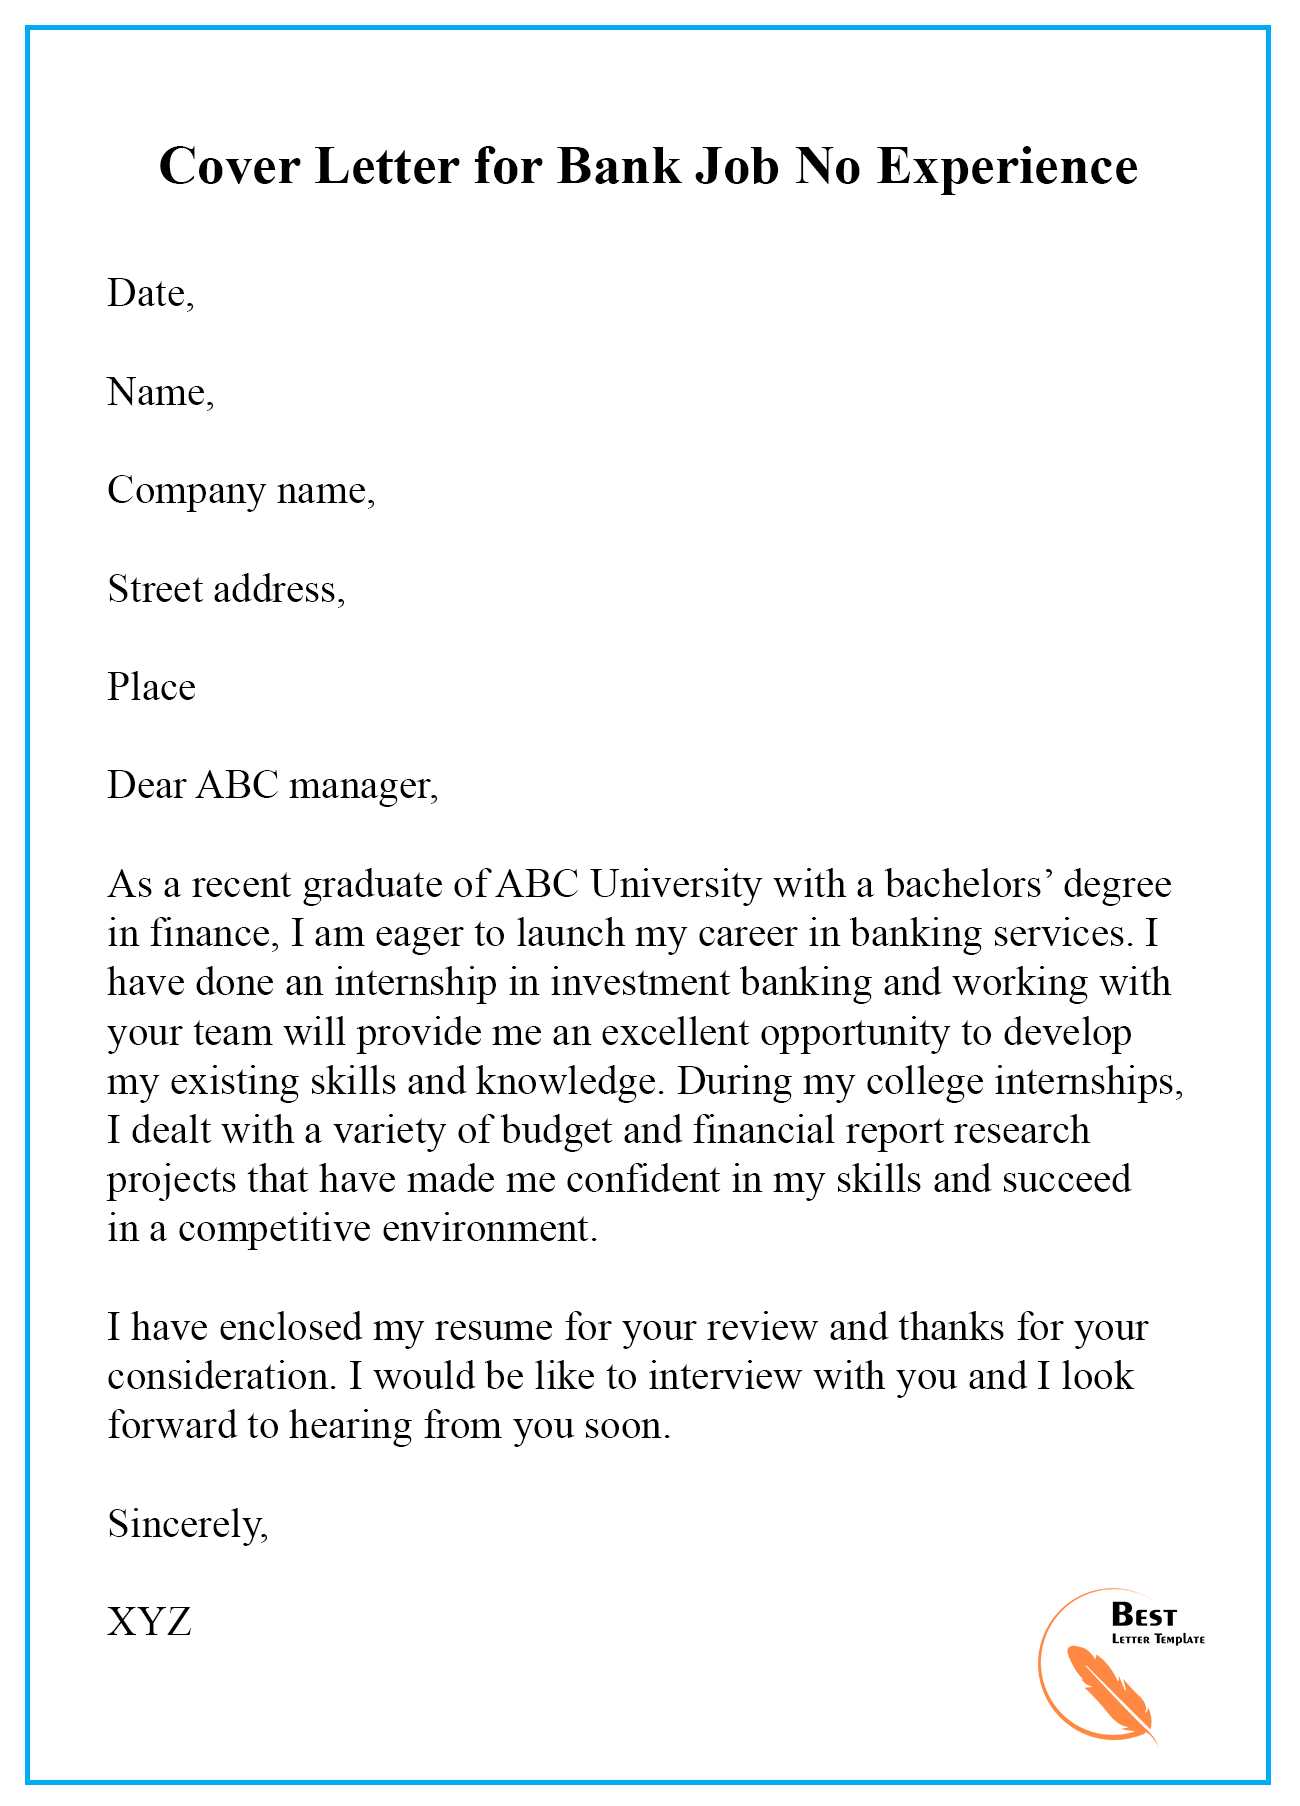 sample cover letter for job with no experience